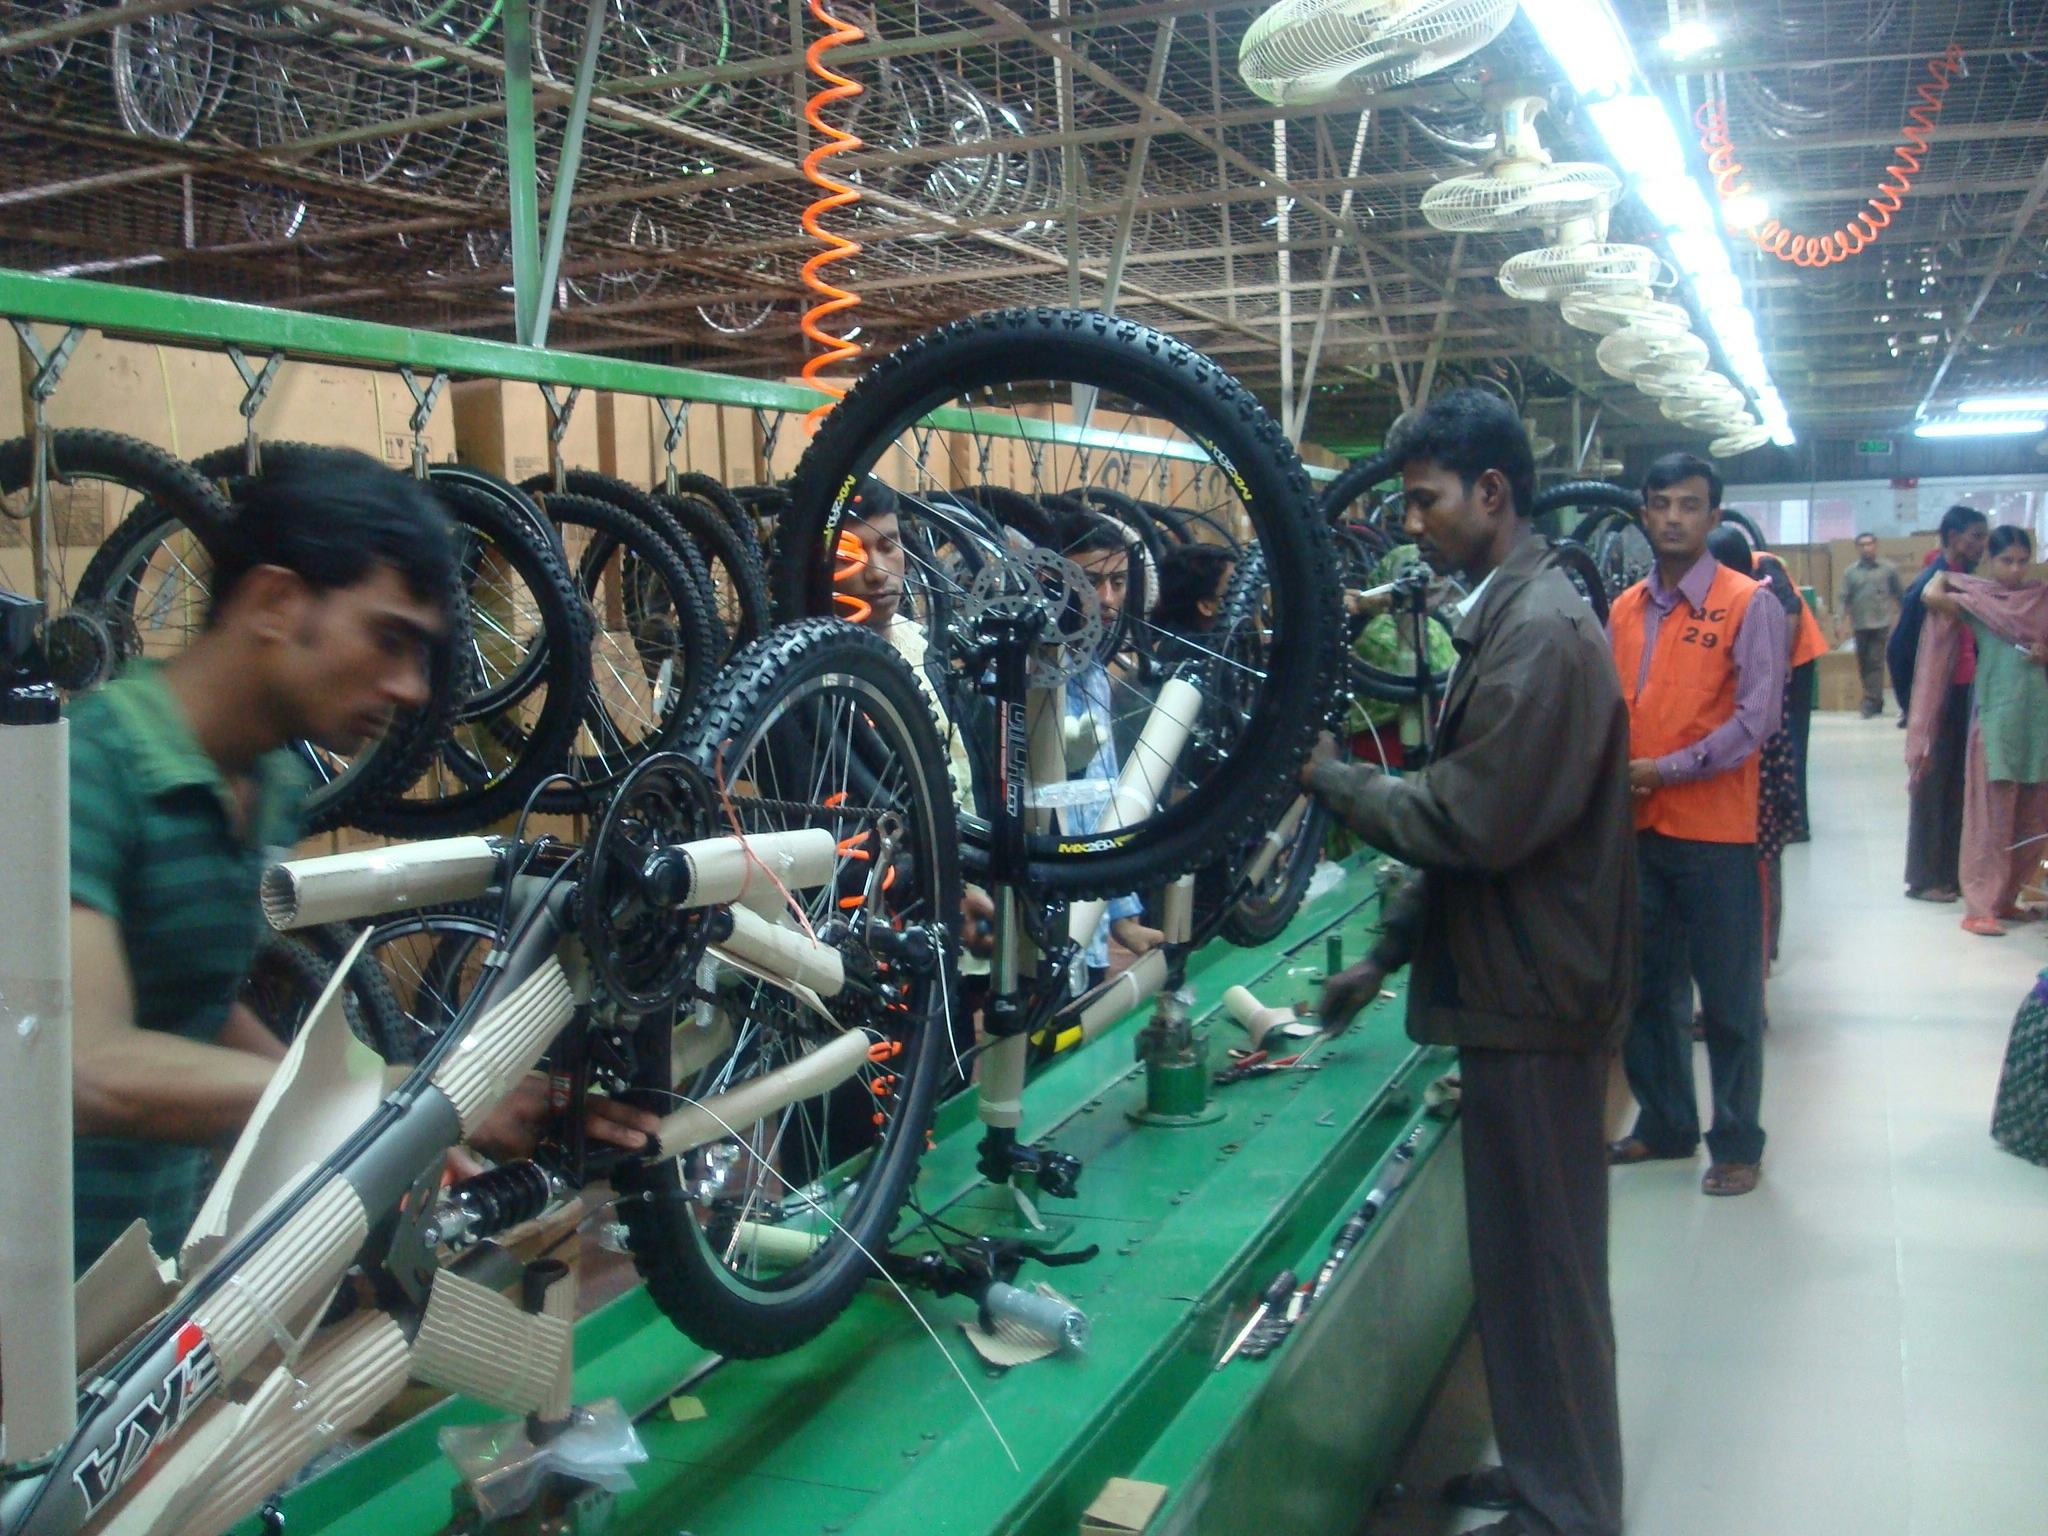 Cambodia’s export to EU dropped slightly in first half of 2019. Sign of much more to come? – Photo Bike Europe